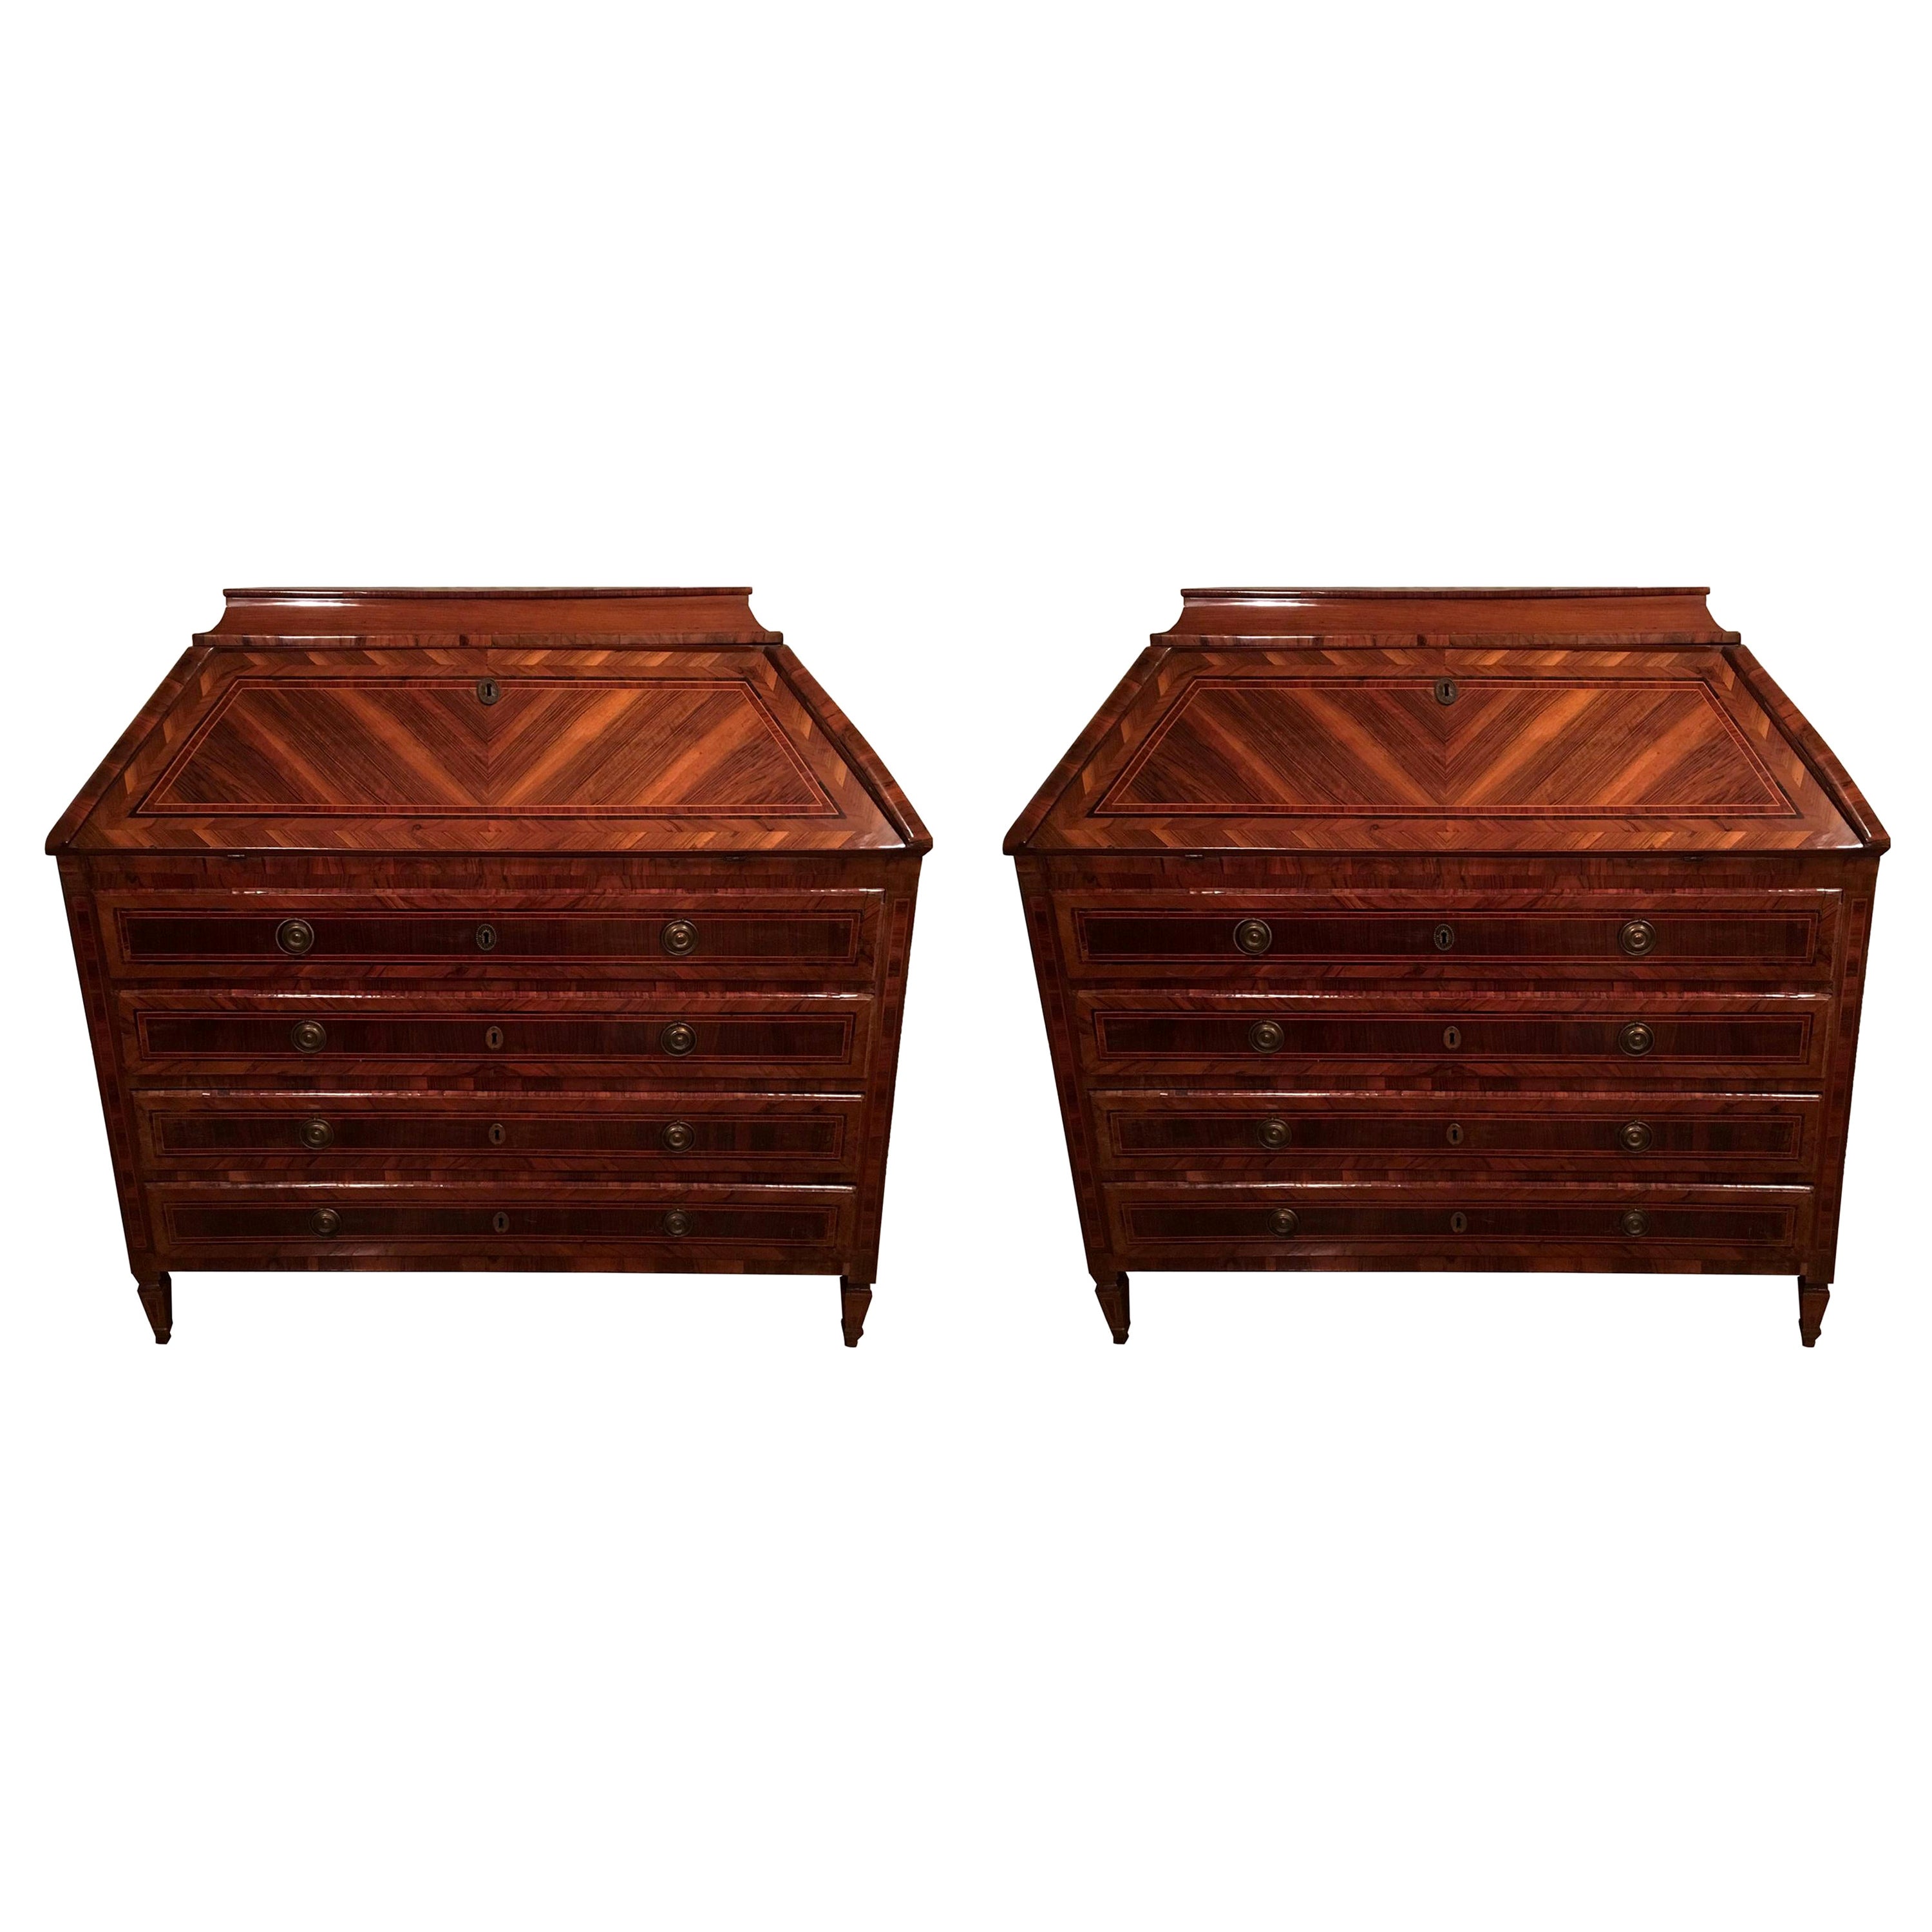 18th Century Pair of Italian Inlaid Walnut Chests of Drawers with Secretaire For Sale